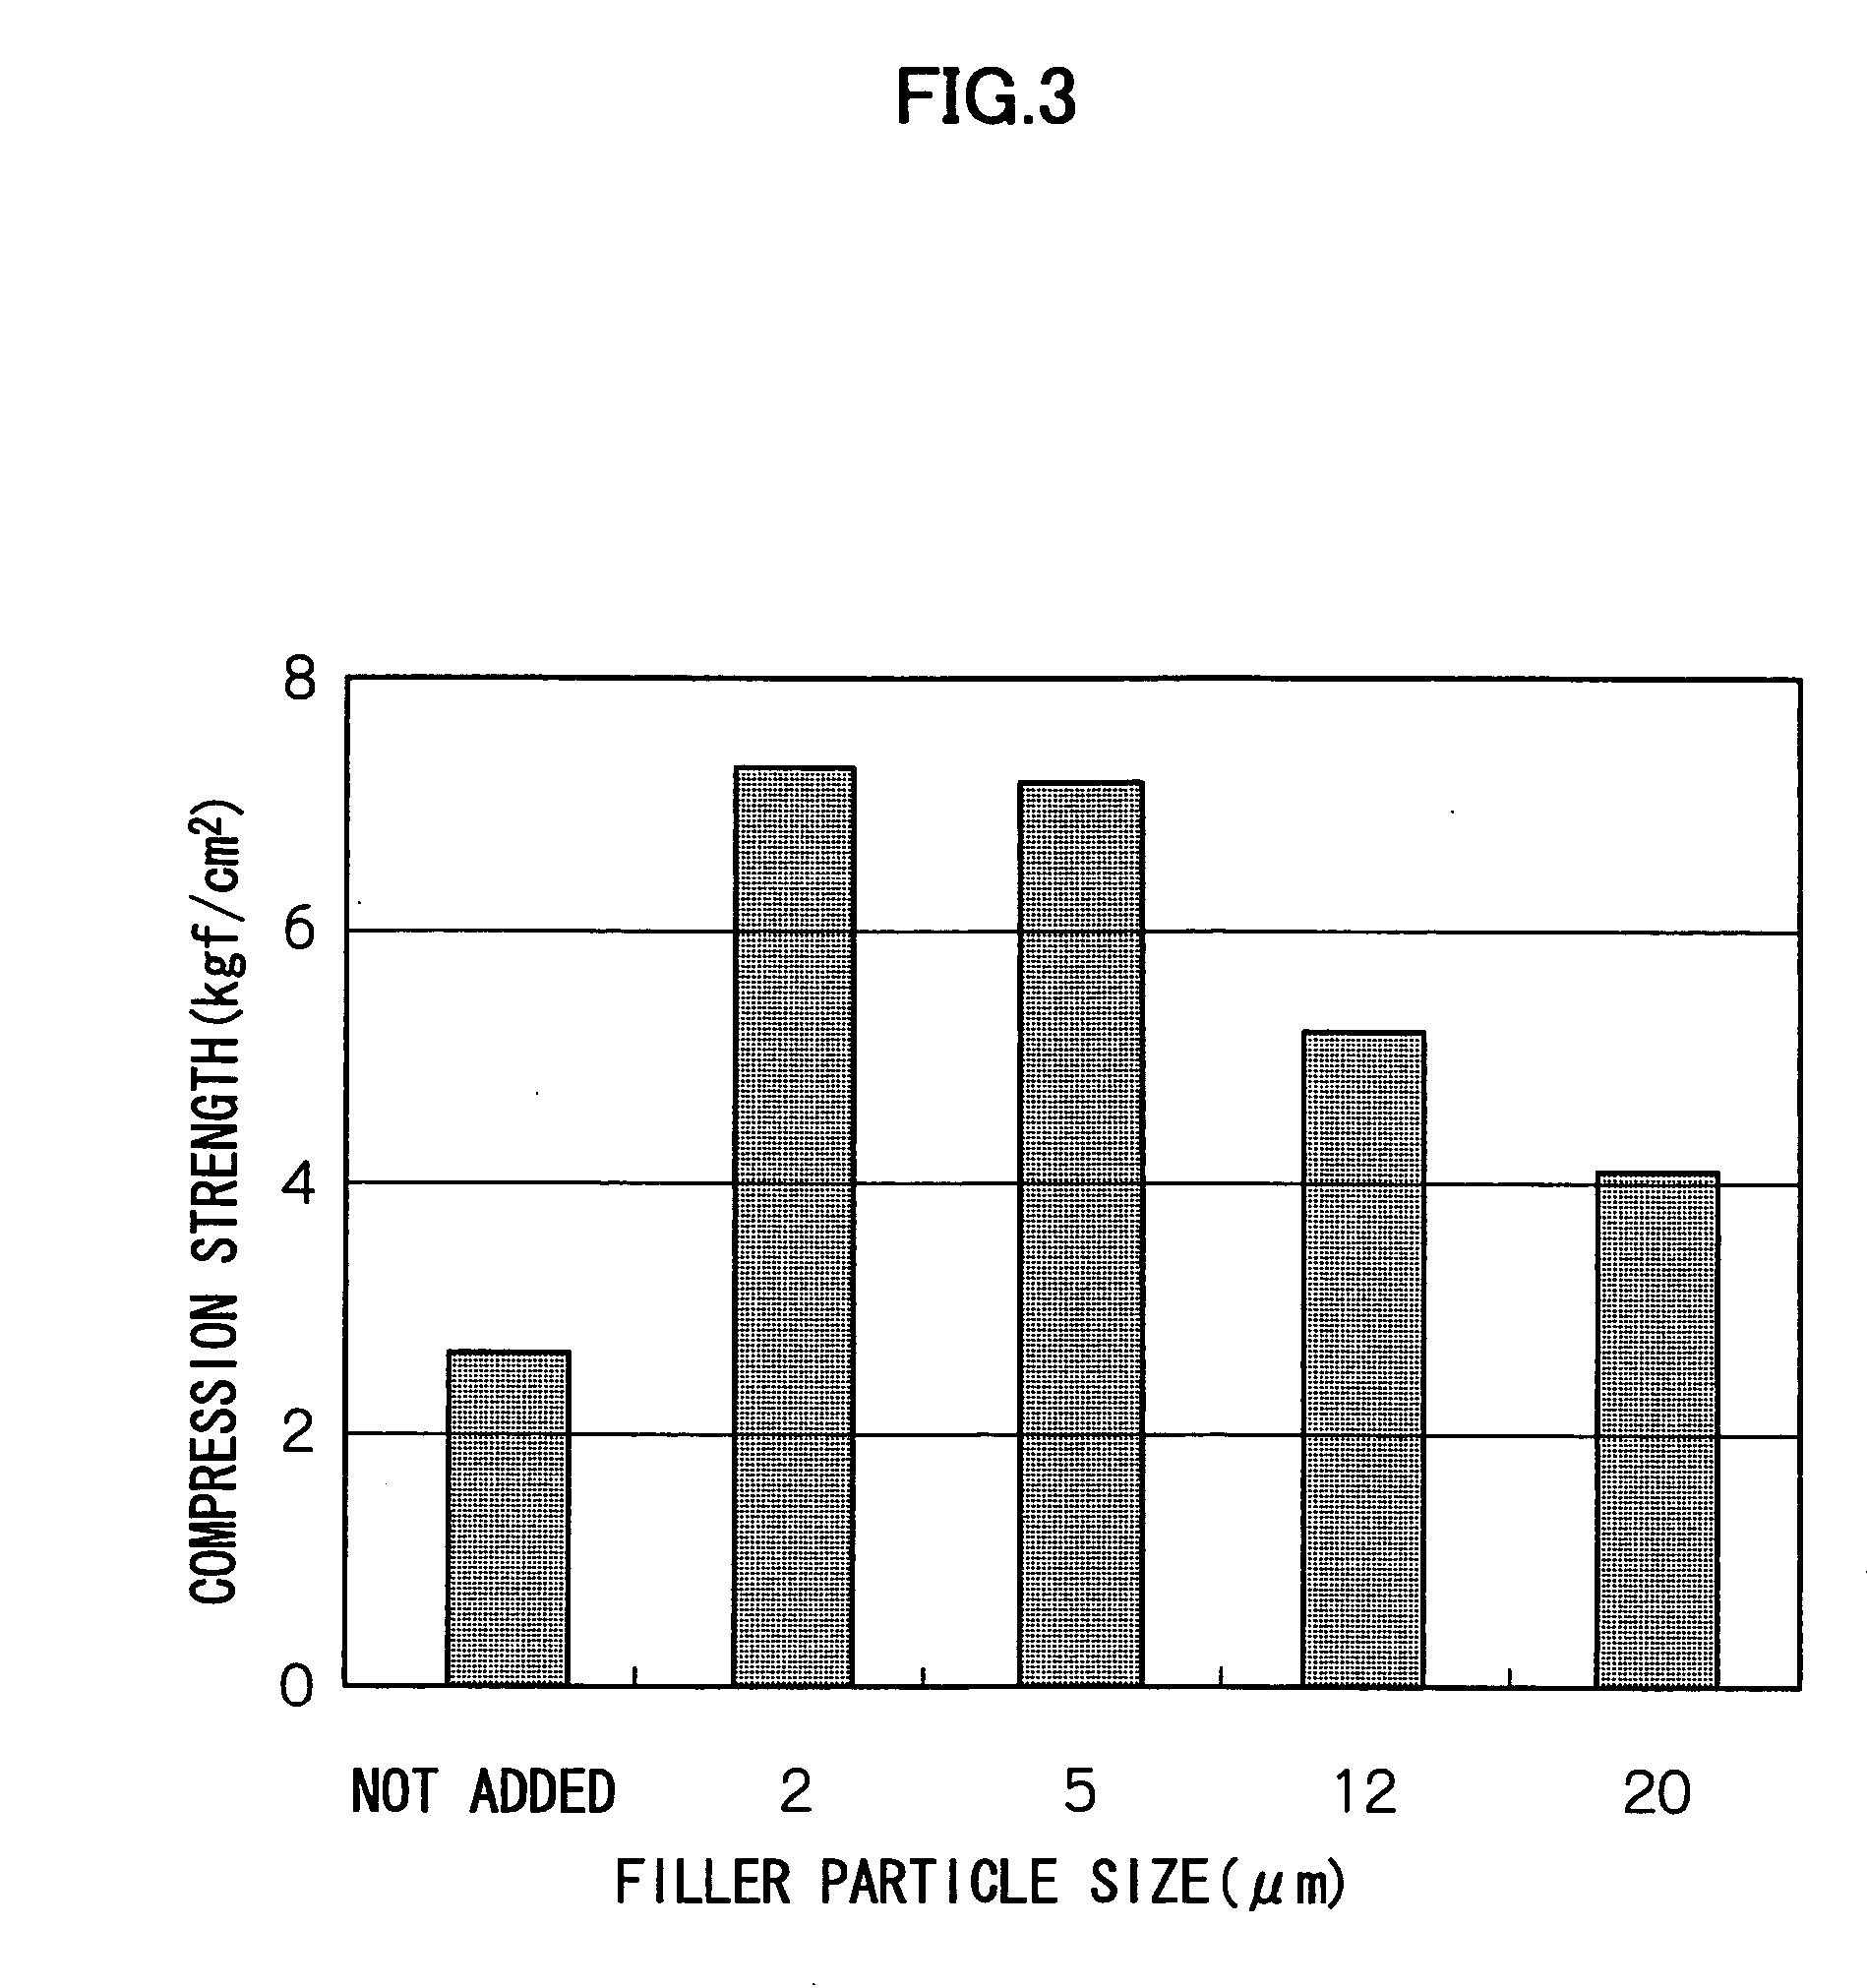 Entrapping immobilization pellets and process for producing the same